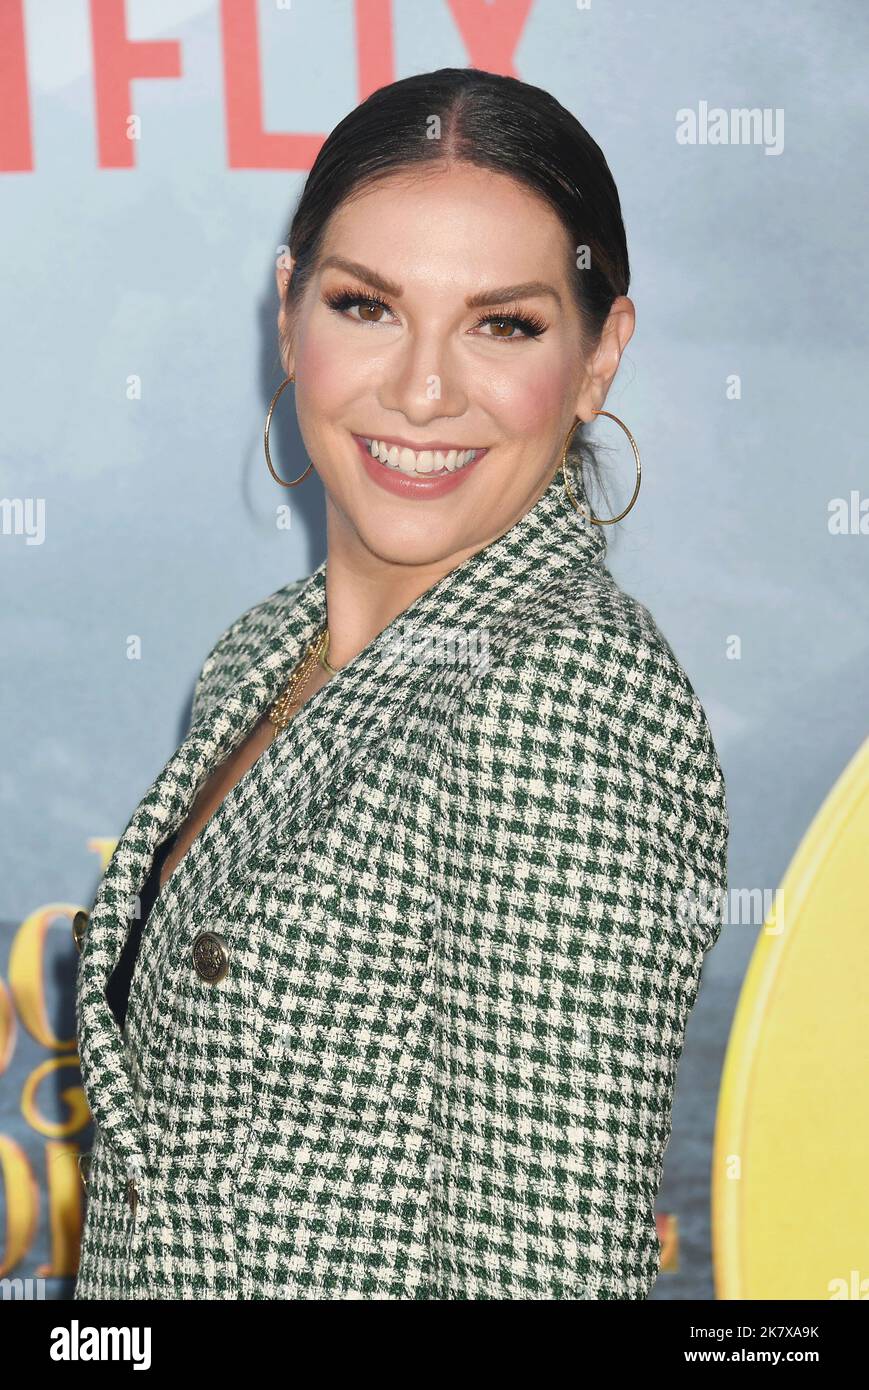 Los Angeles, Ca. 18th Oct, 2022. Allison Holker-Boss attend the premiere of Netflix's 'The School for Good and Evil' at Regency Village Theatre on October 18, 2022 in Los Angeles, California. Credit: Jeffrey Mayer/Jtm Photos/Media Punch/Alamy Live News Stock Photo